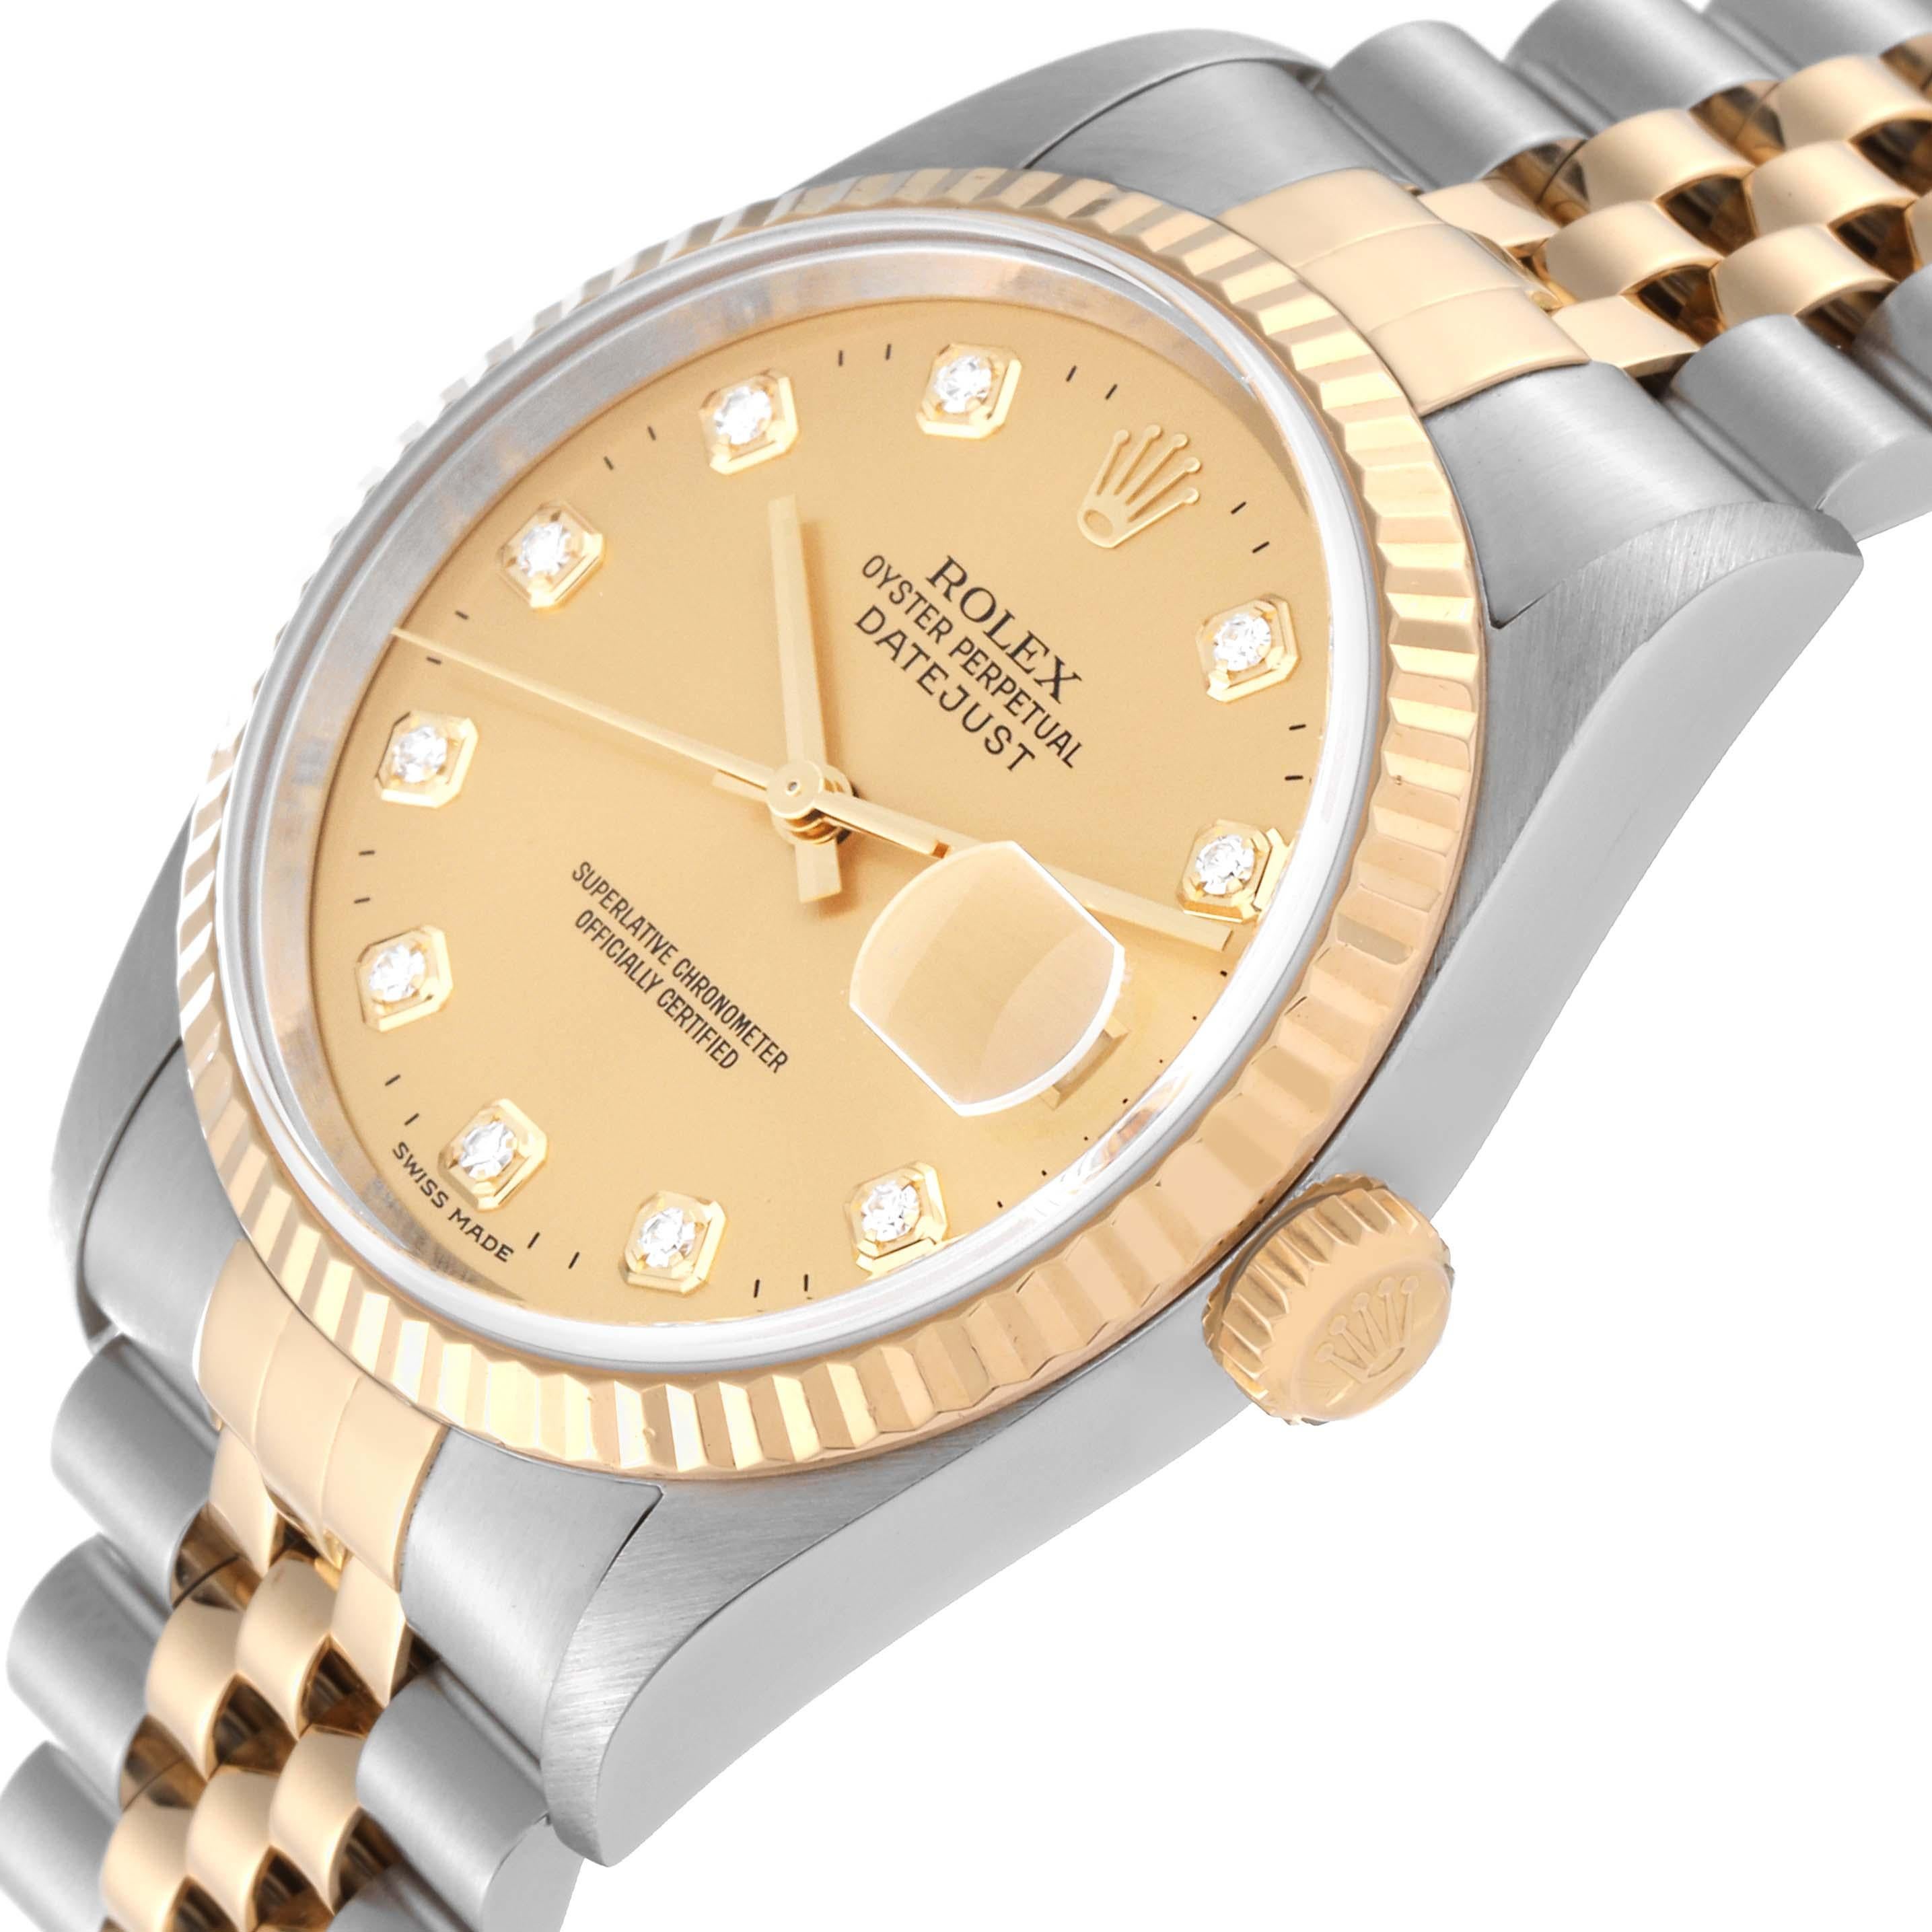 Rolex Datejust Champagne Diamond Dial Steel Yellow Gold Mens Watch 16233 For Sale 2